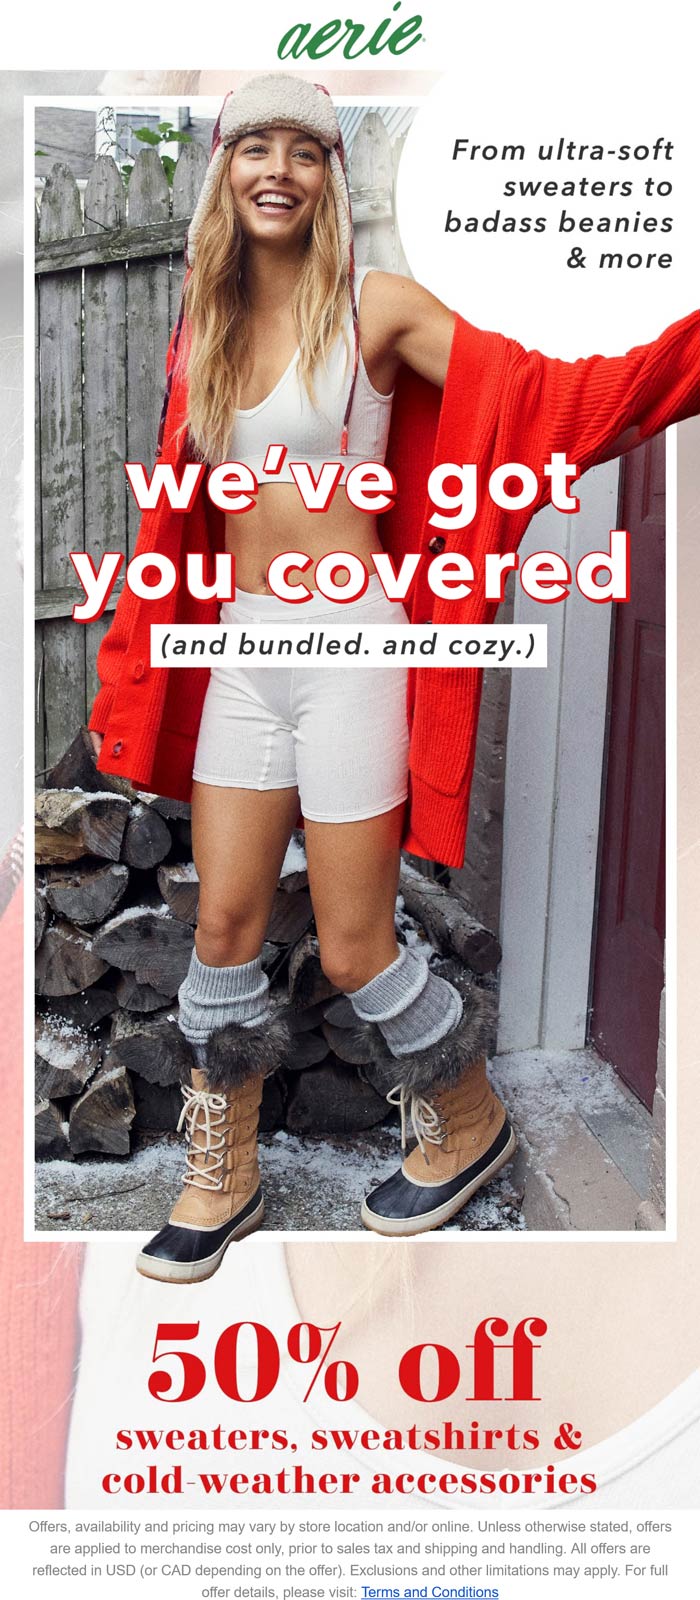 Aerie stores Coupon  50% off sweaters & cold weather at Aerie, ditto online #aerie 